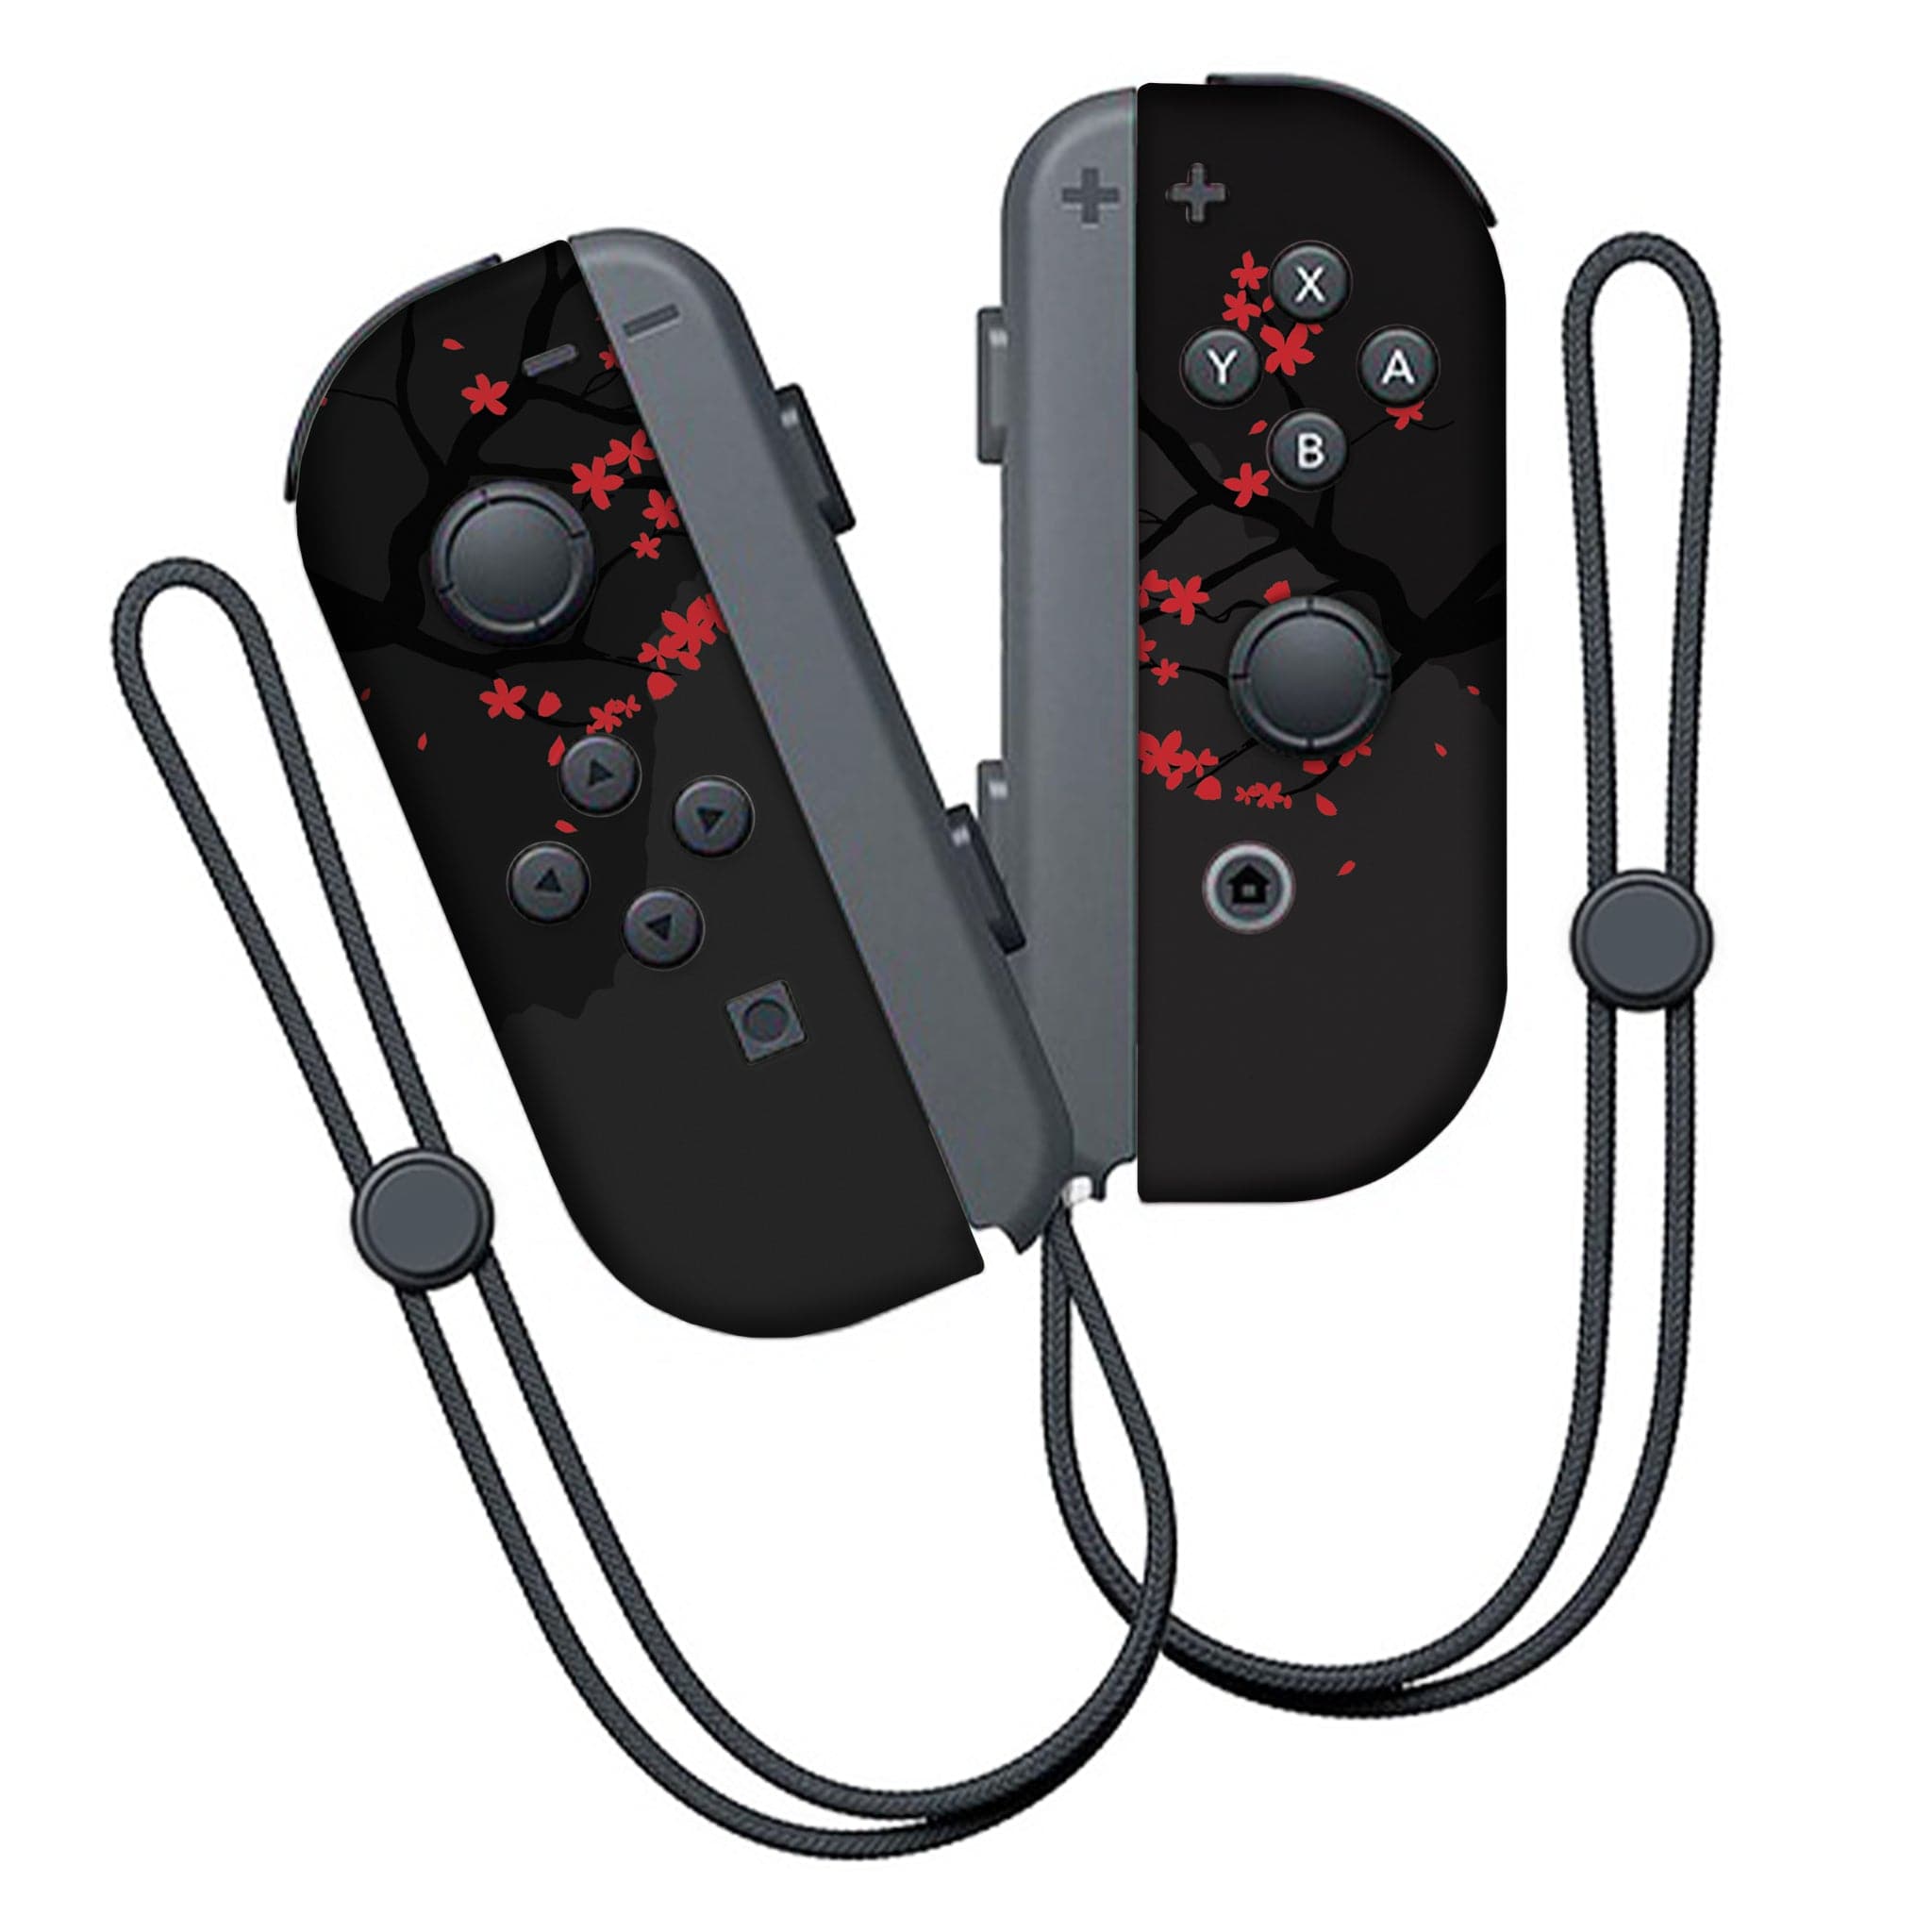 Kung Fu Panda Inspired Nintendo Switch Joy-Con Left and Right Switch Controllers by Nintendo